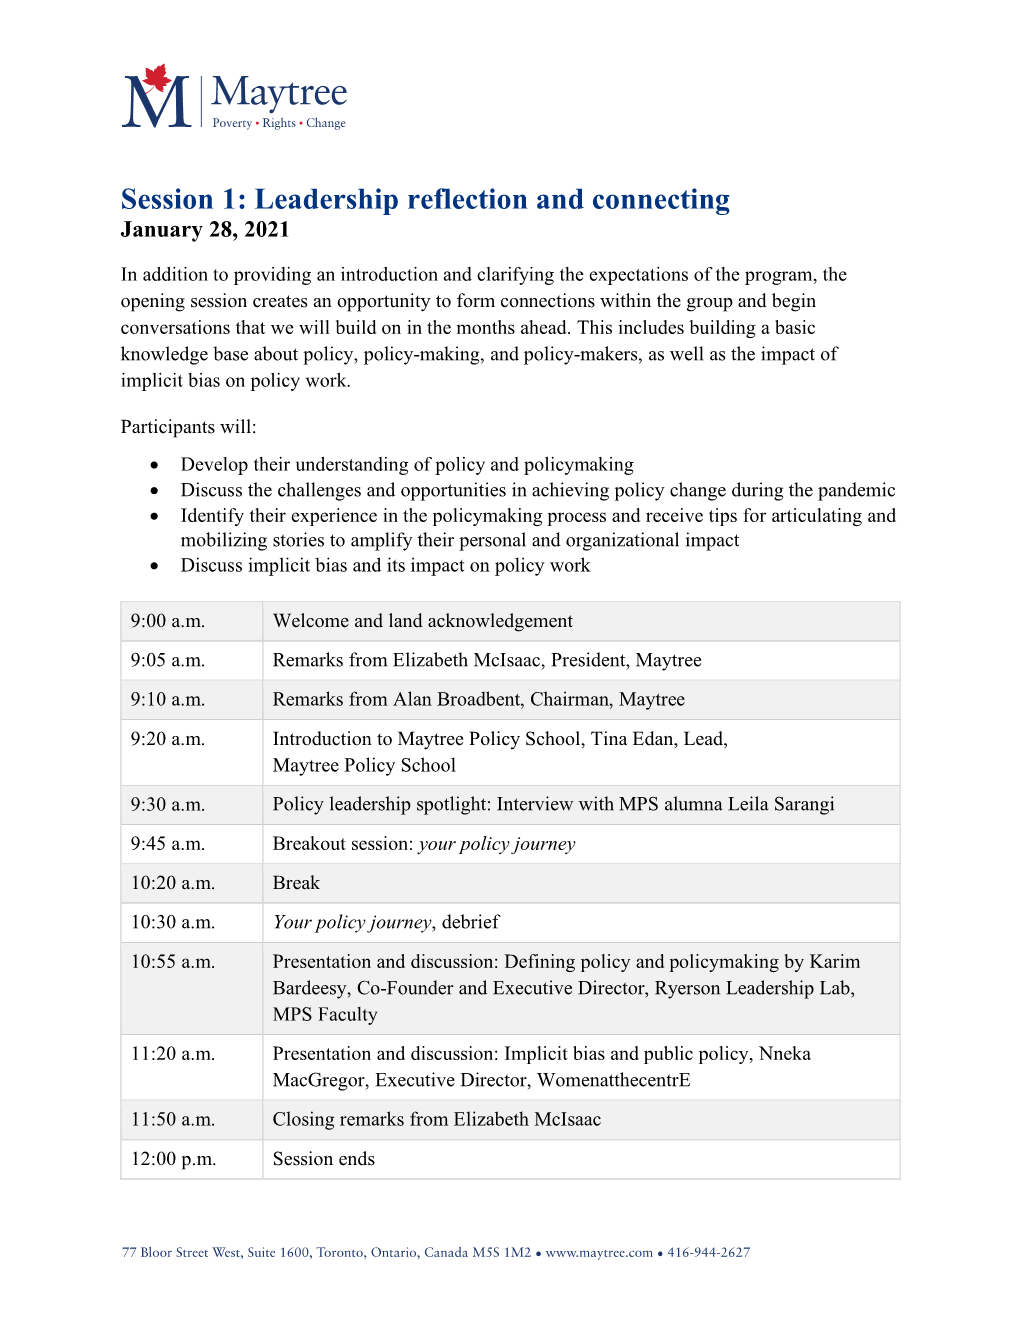 Session 1: Leadership Reflection and Connecting January 28, 2021